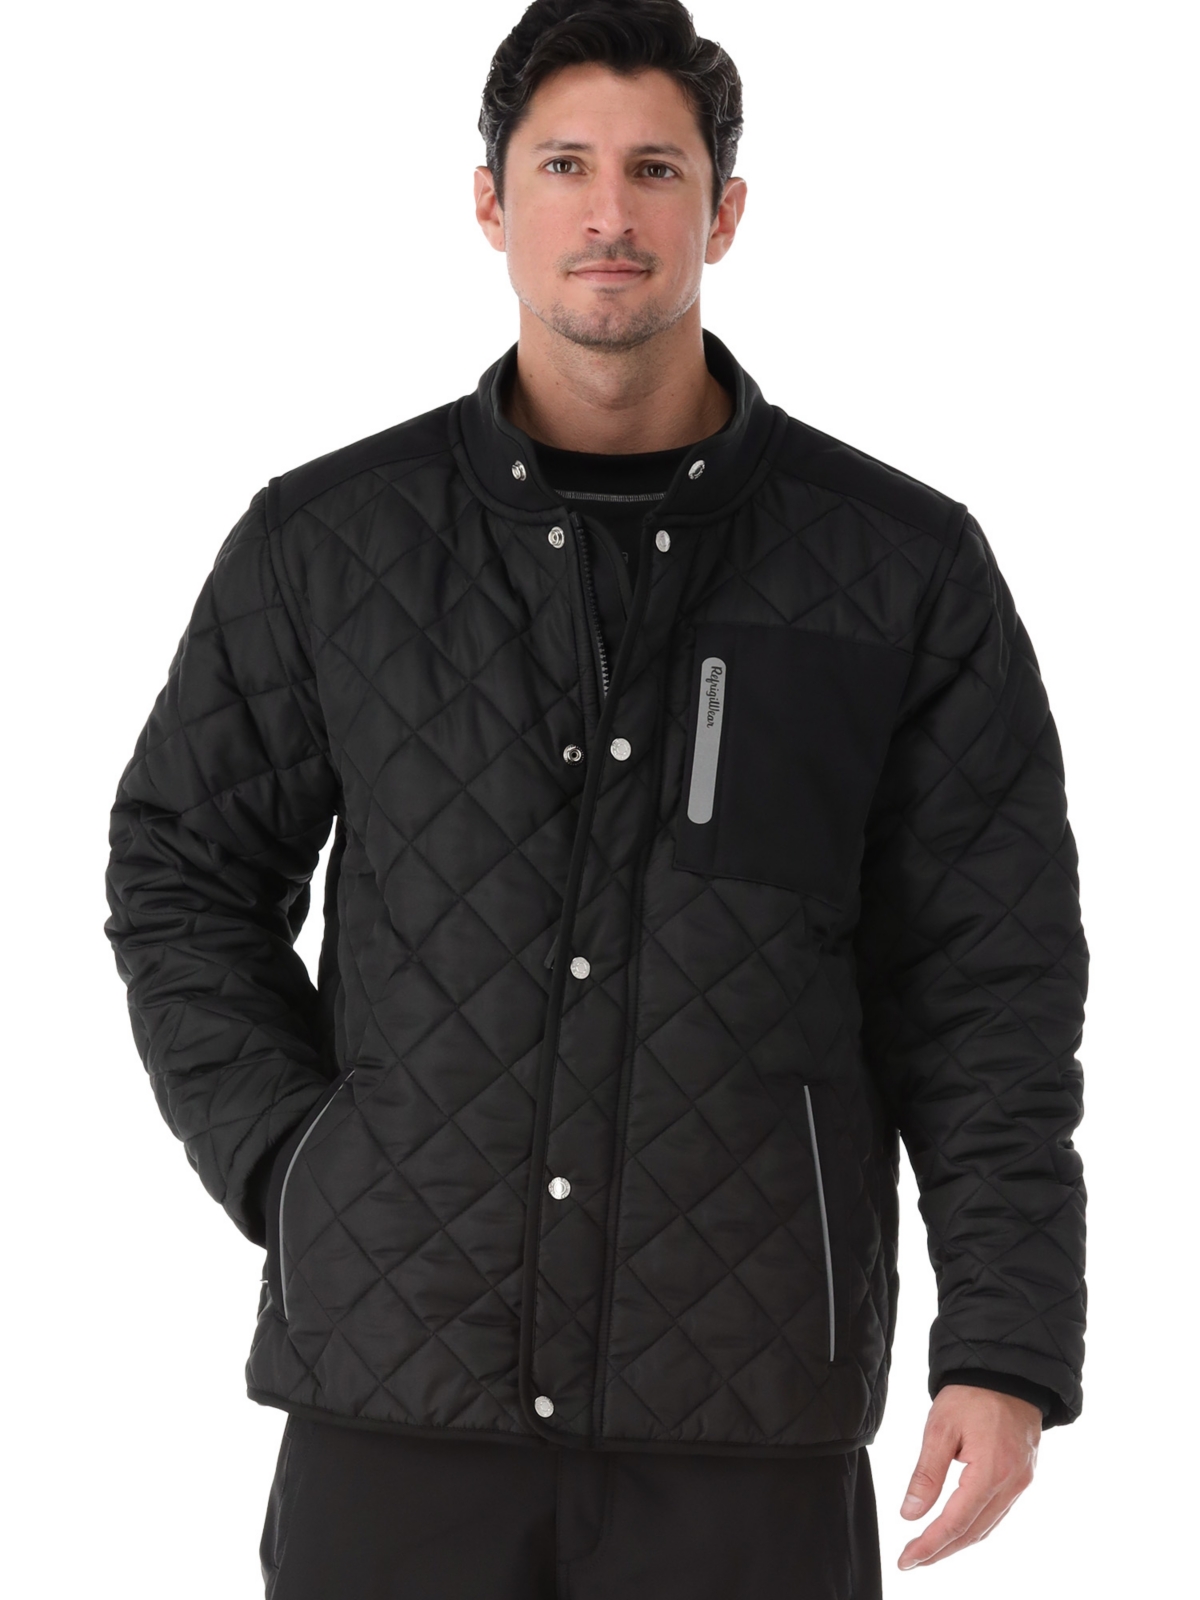 Men's Diamond Insulated Quilted Jacket - Black